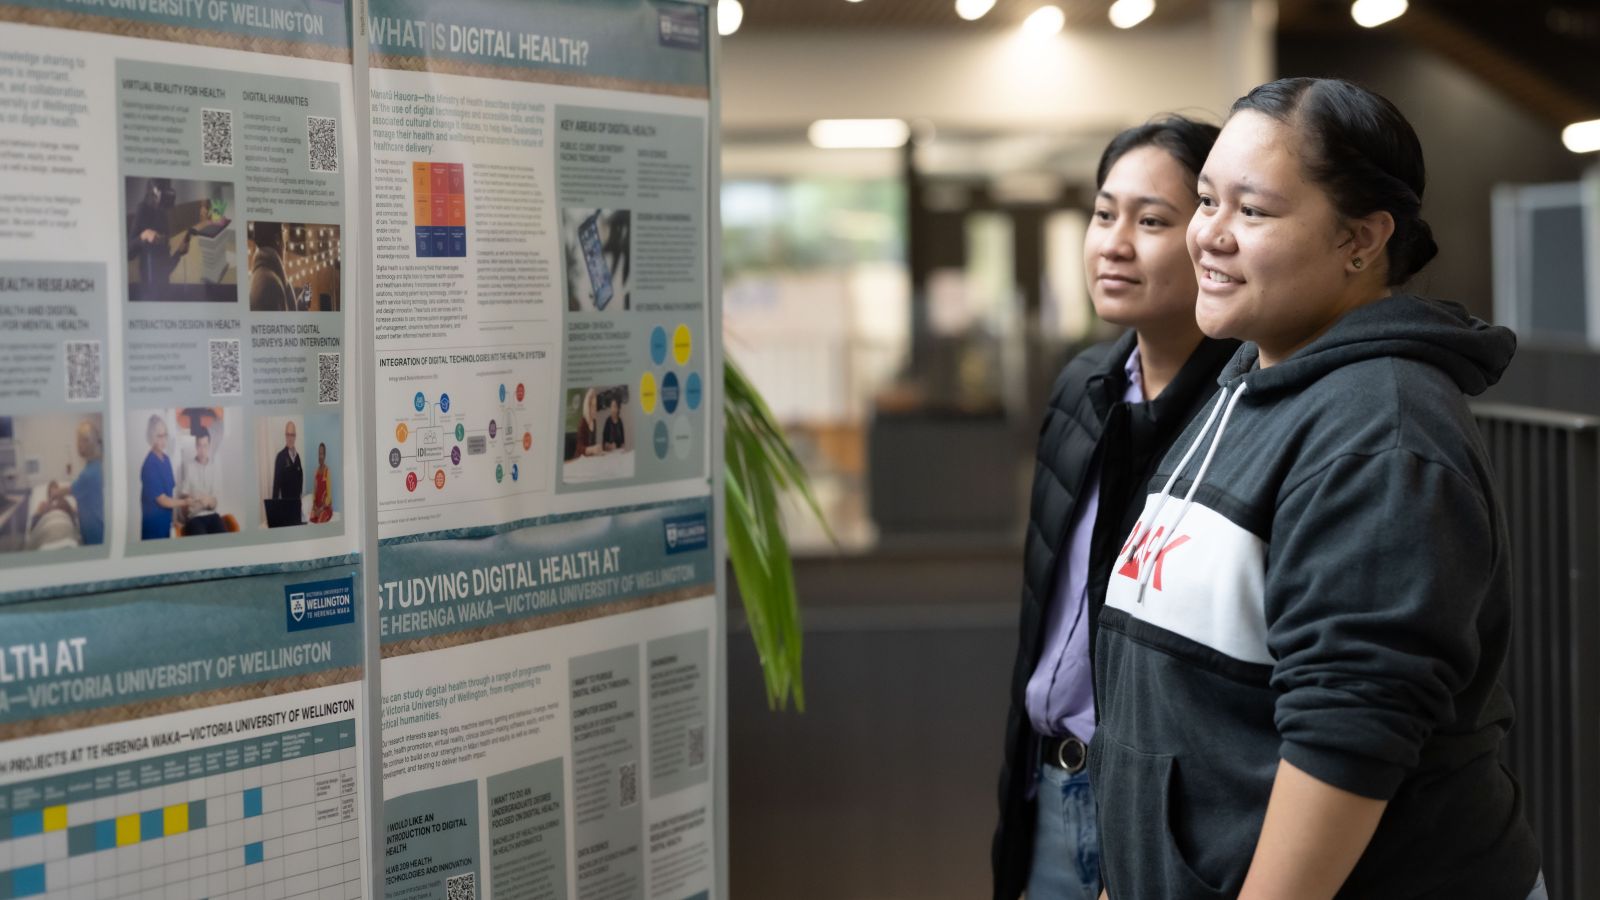 Two students read posters about digital health.